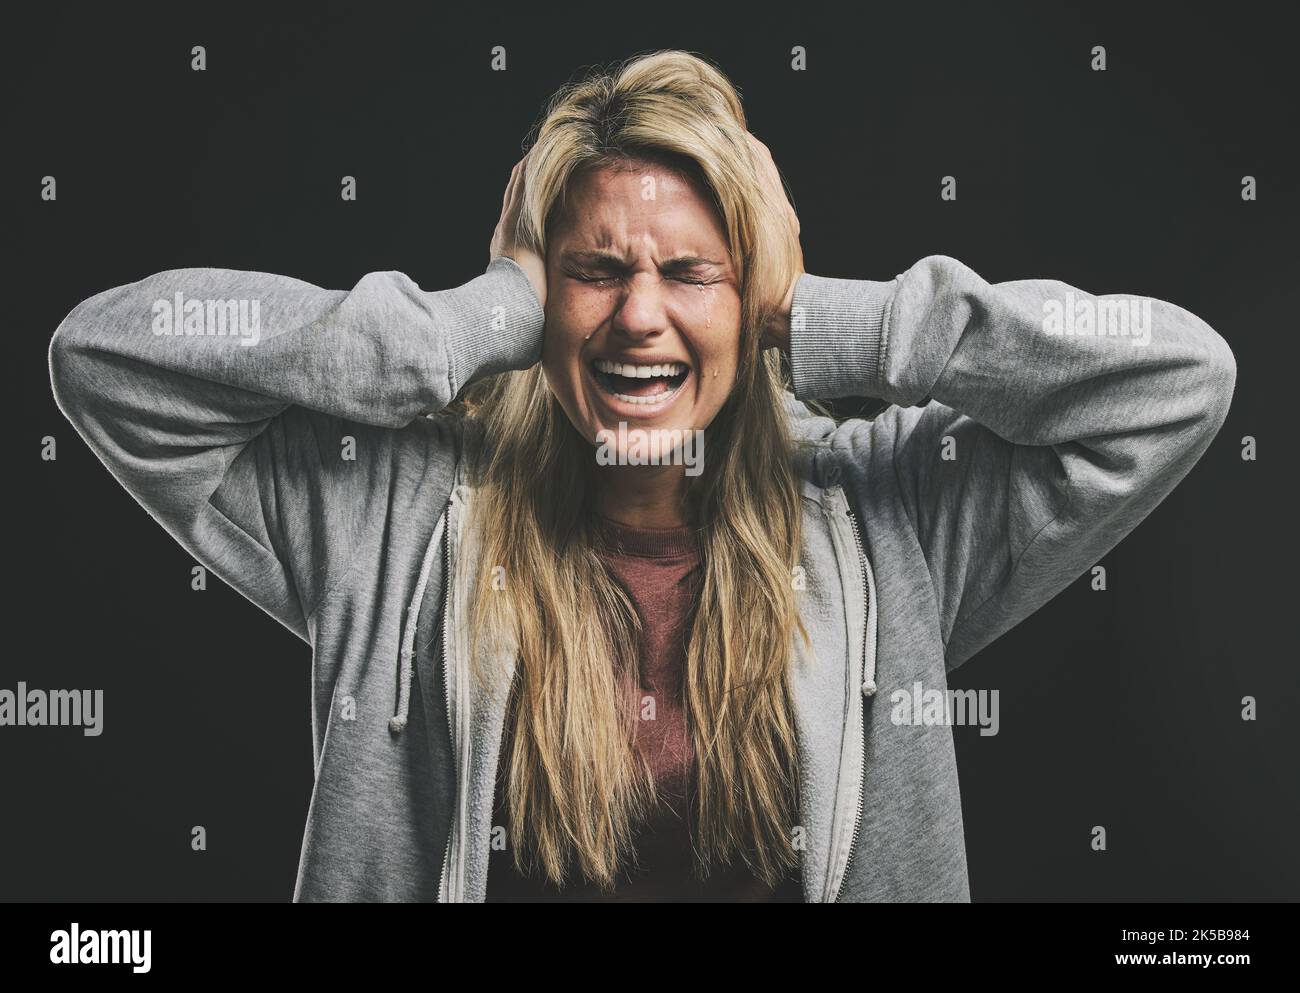 Stress, screaming or crying woman with hands over ears on black background in studio with mental health, anxiety or schizophrenia. Psychology Stock Photo